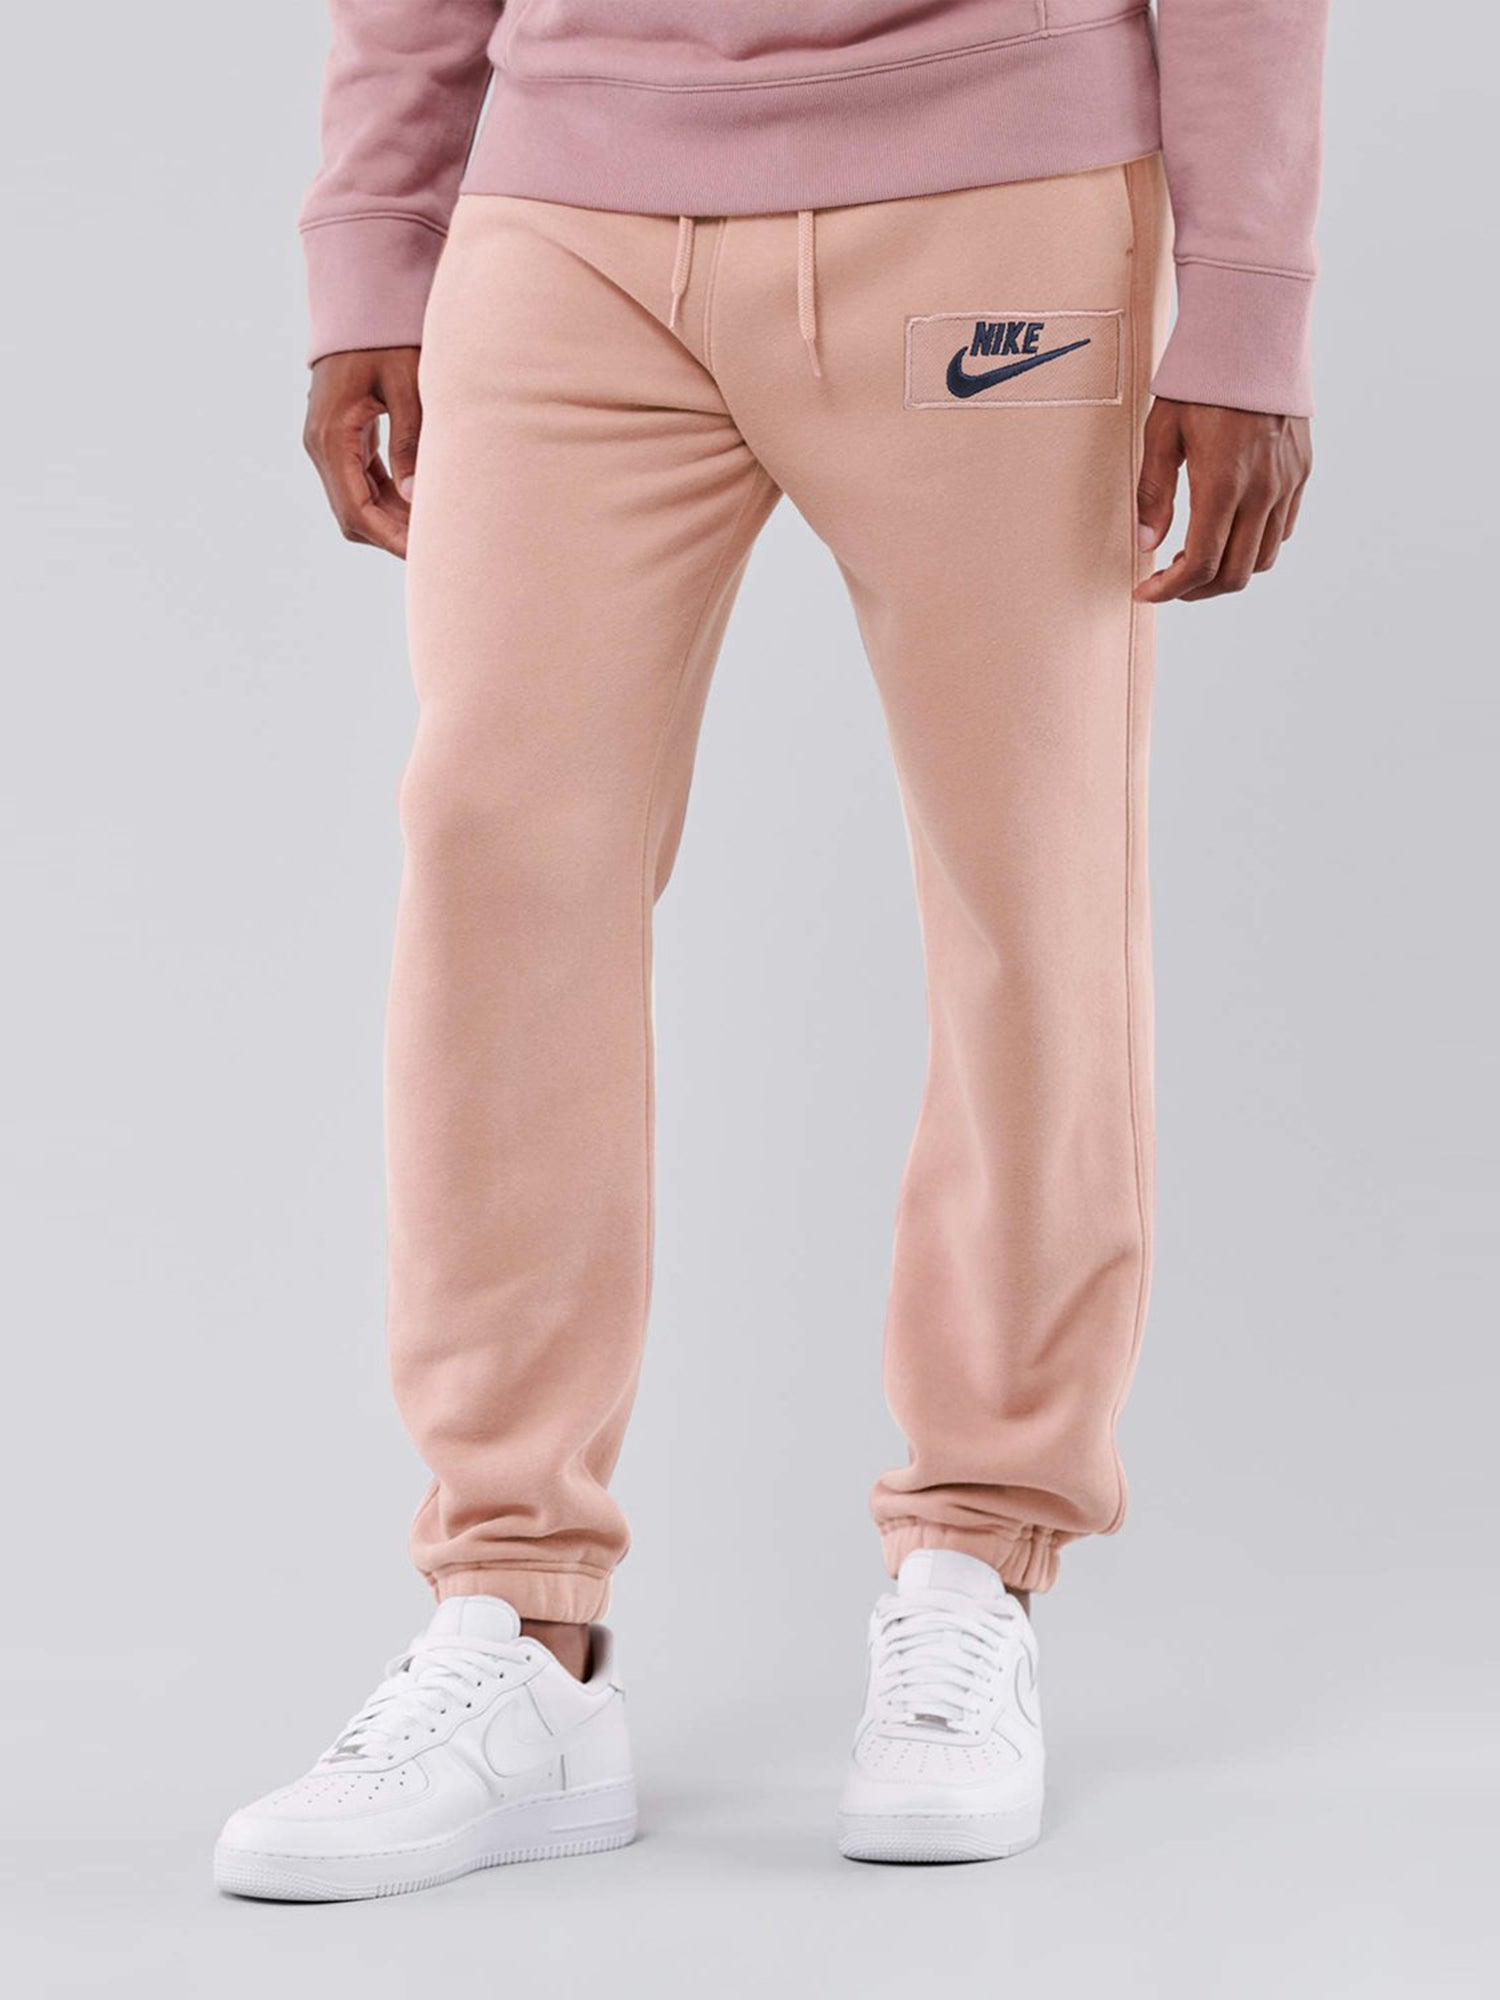 NK Terry Fleece Gathering Fit Pant Style Jogging Trouser For Men-Peach-BE201/BR1001